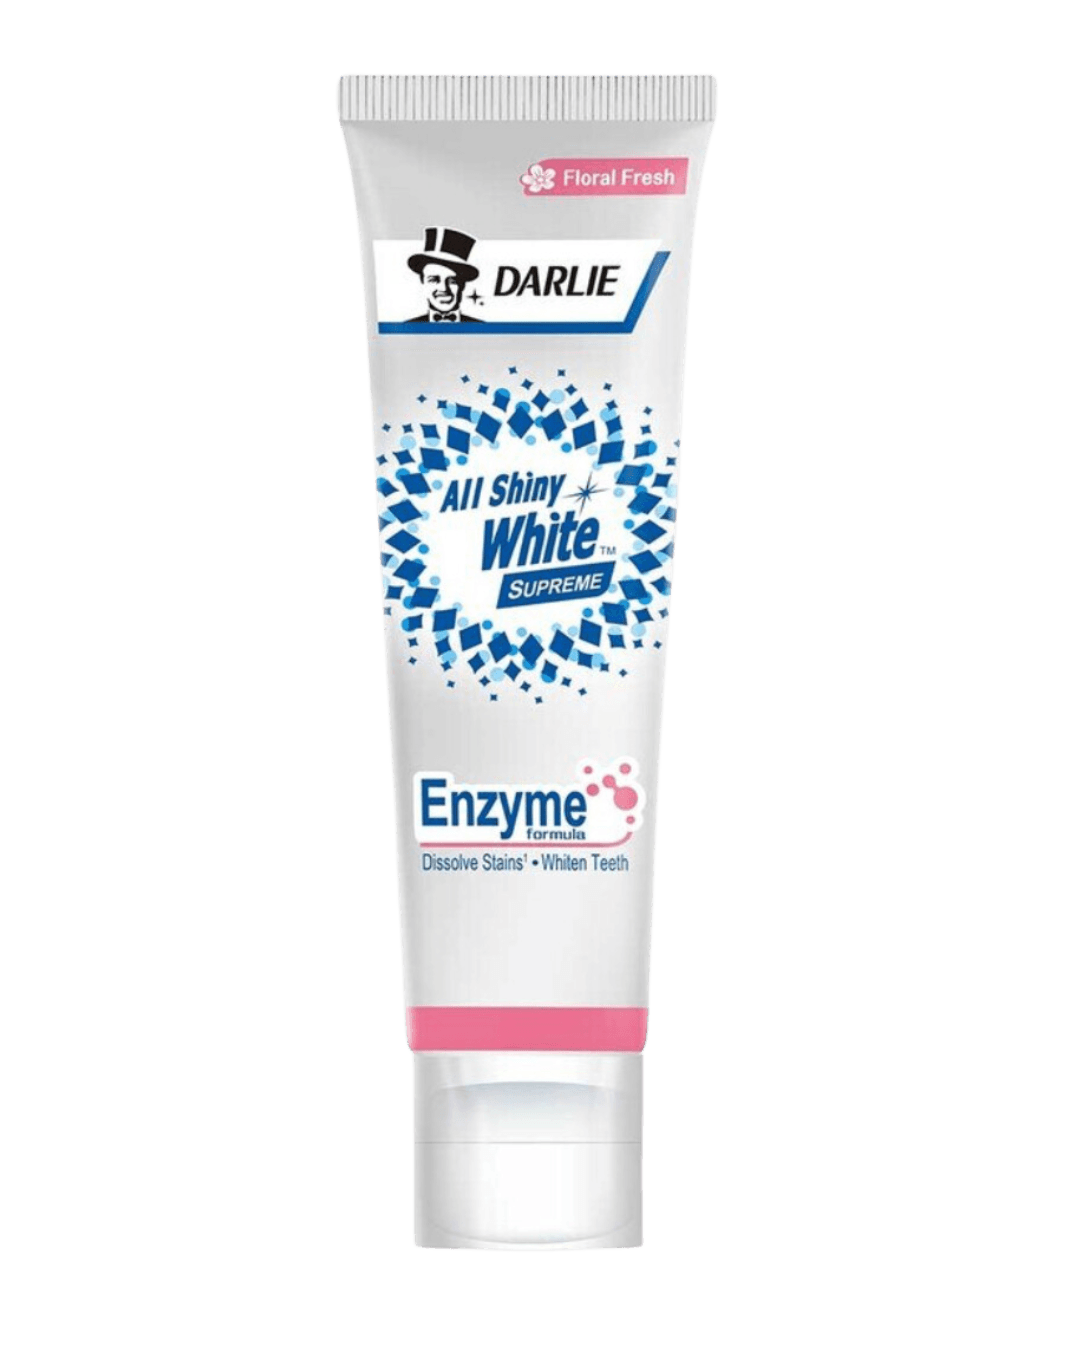 Darlie All Shiny White Supreme Enzyme Whitening Toothpaste